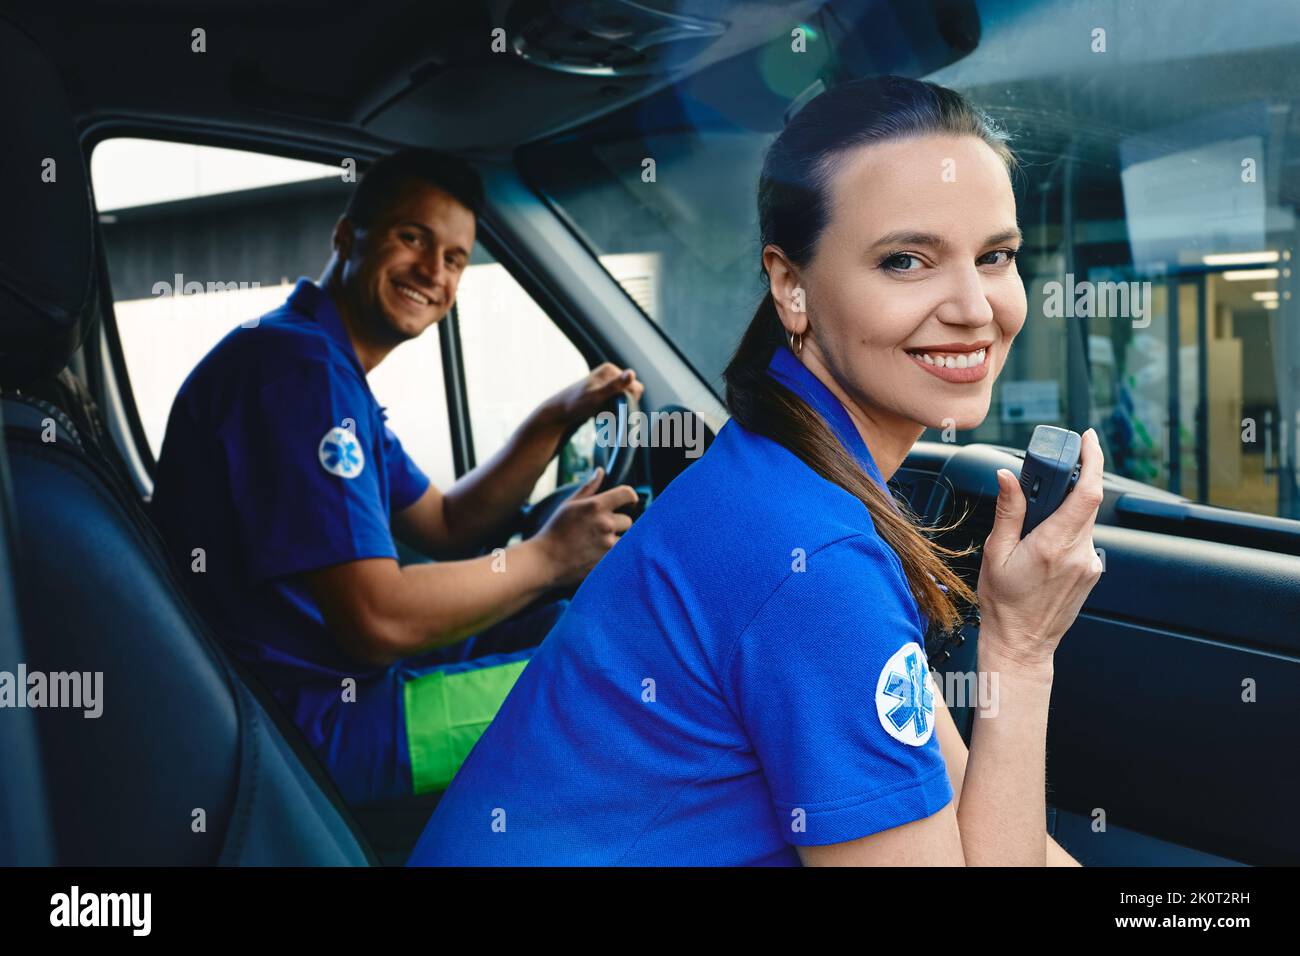 Positive female paramedic talking on portable radio while sitting in ambulance next to her emergency co-worker. Emergency medical services workers Stock Photo